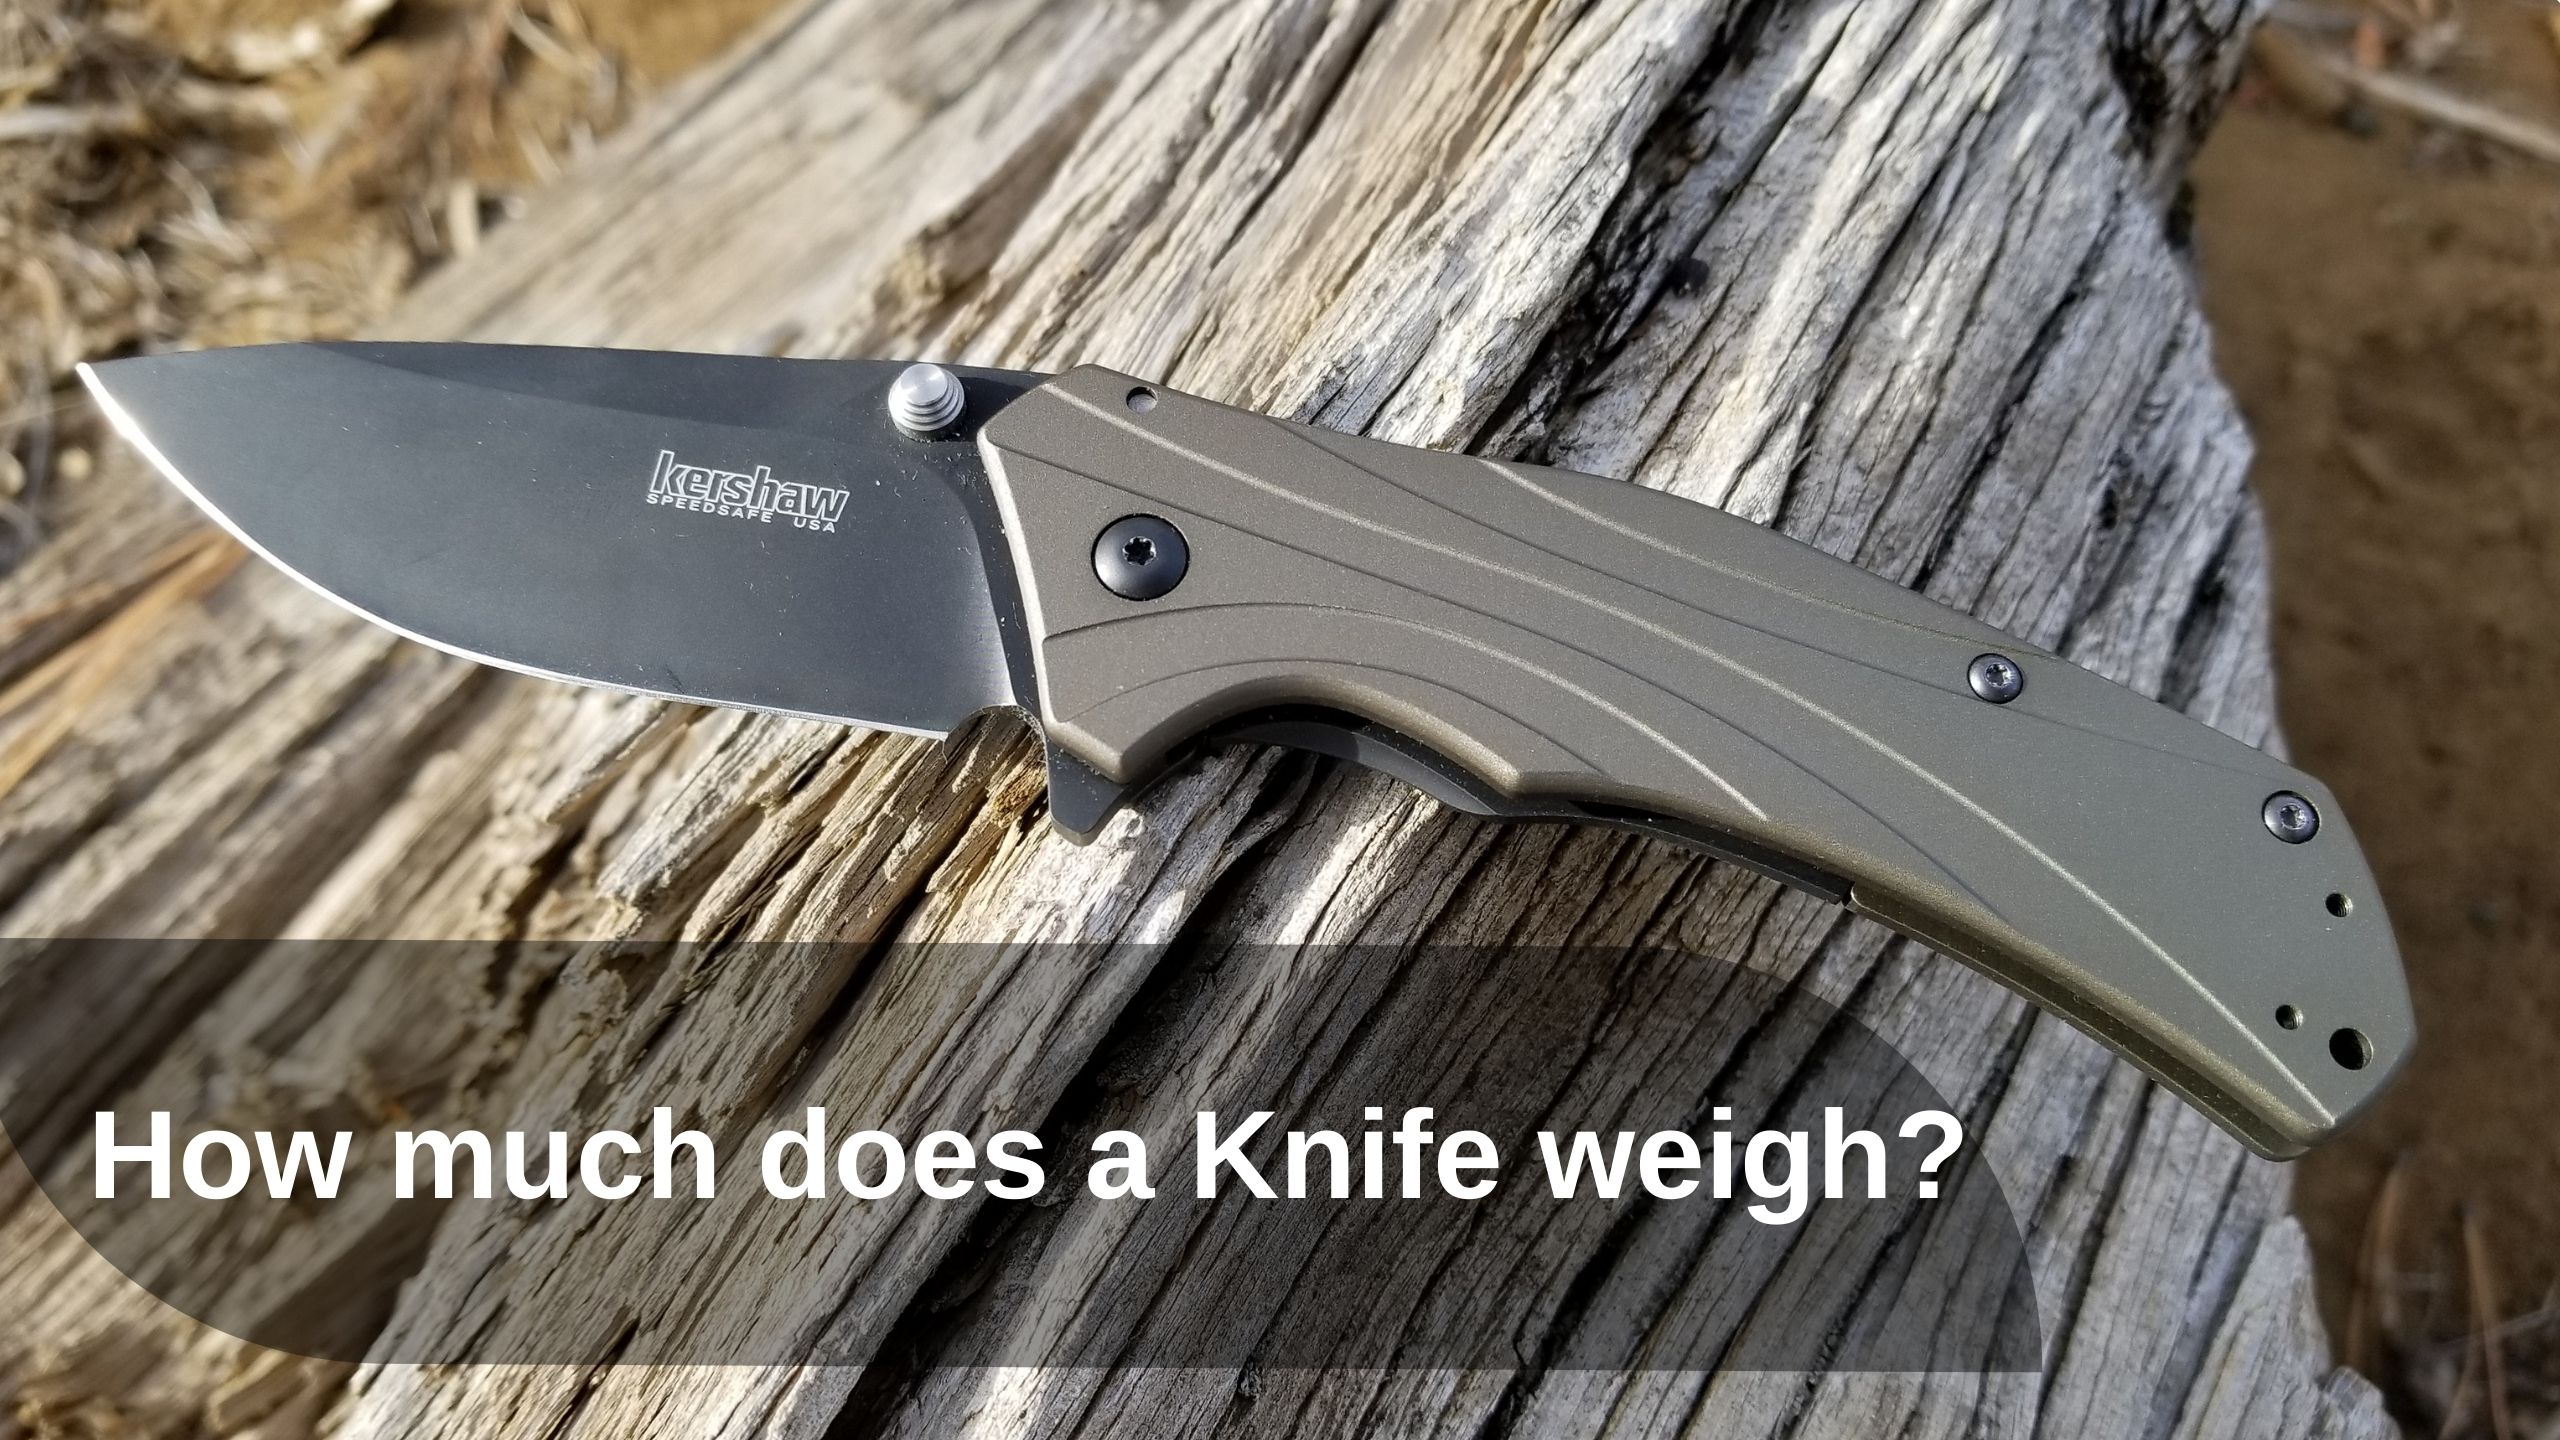 How much does a Knife weigh?